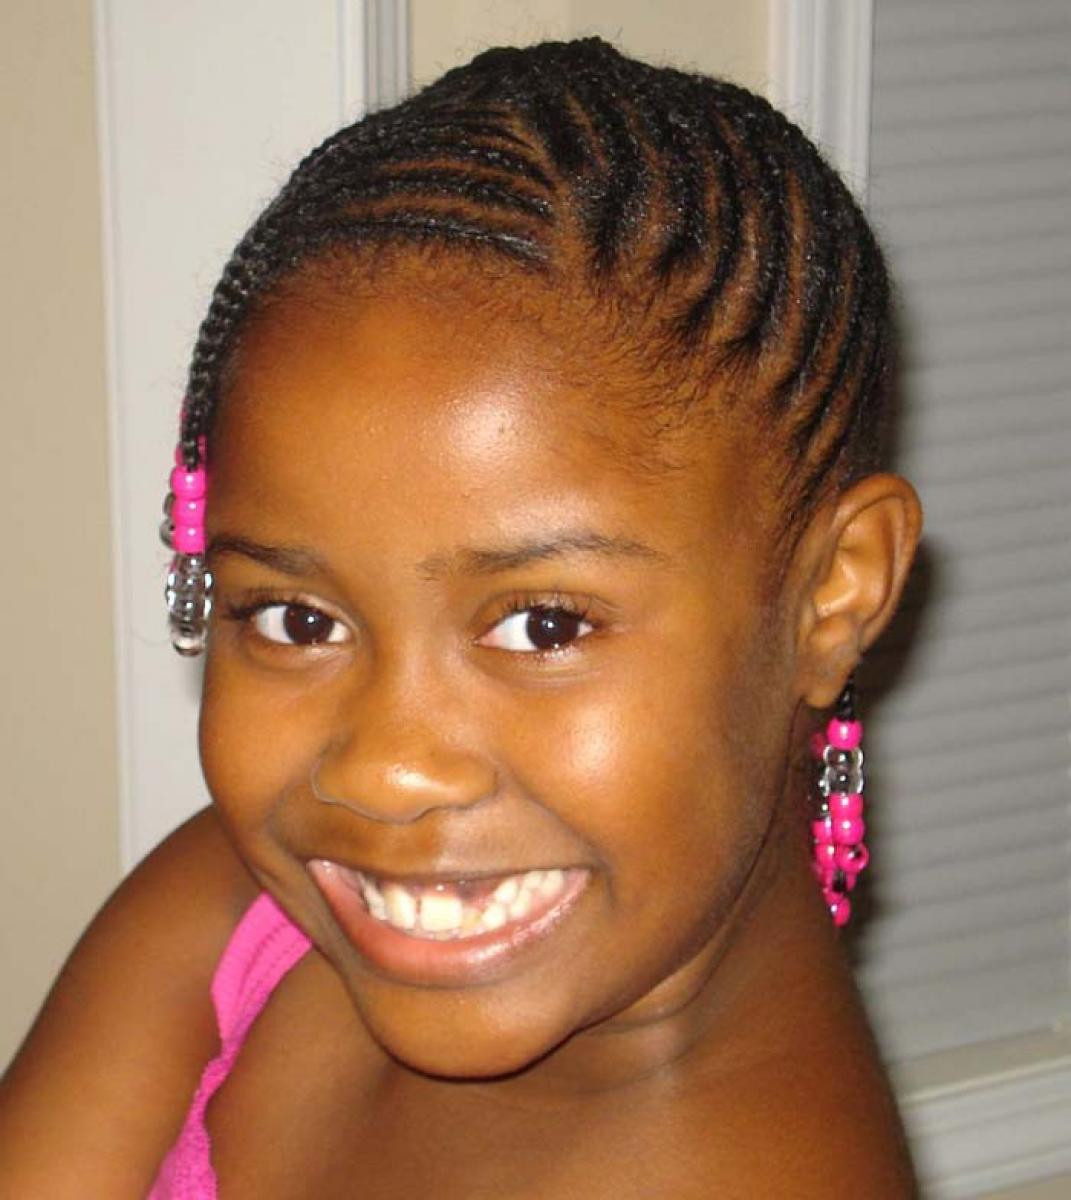 Hairstyles For Black Kids With Short Hair
 Best Children s Hairstyles